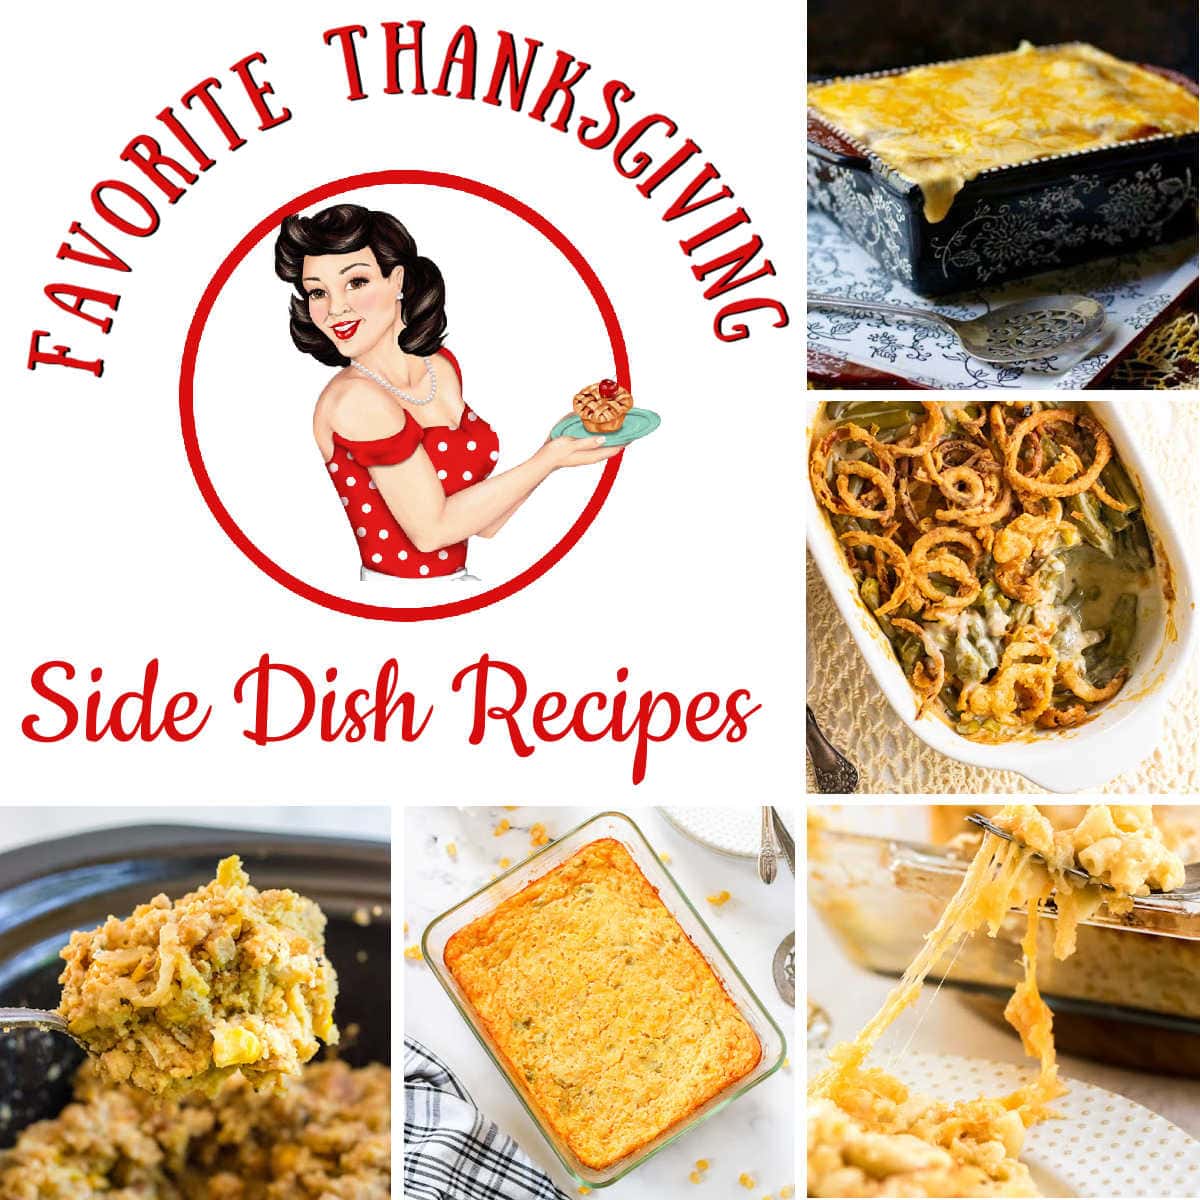 Collage of Thankgiving side dishes with title text.